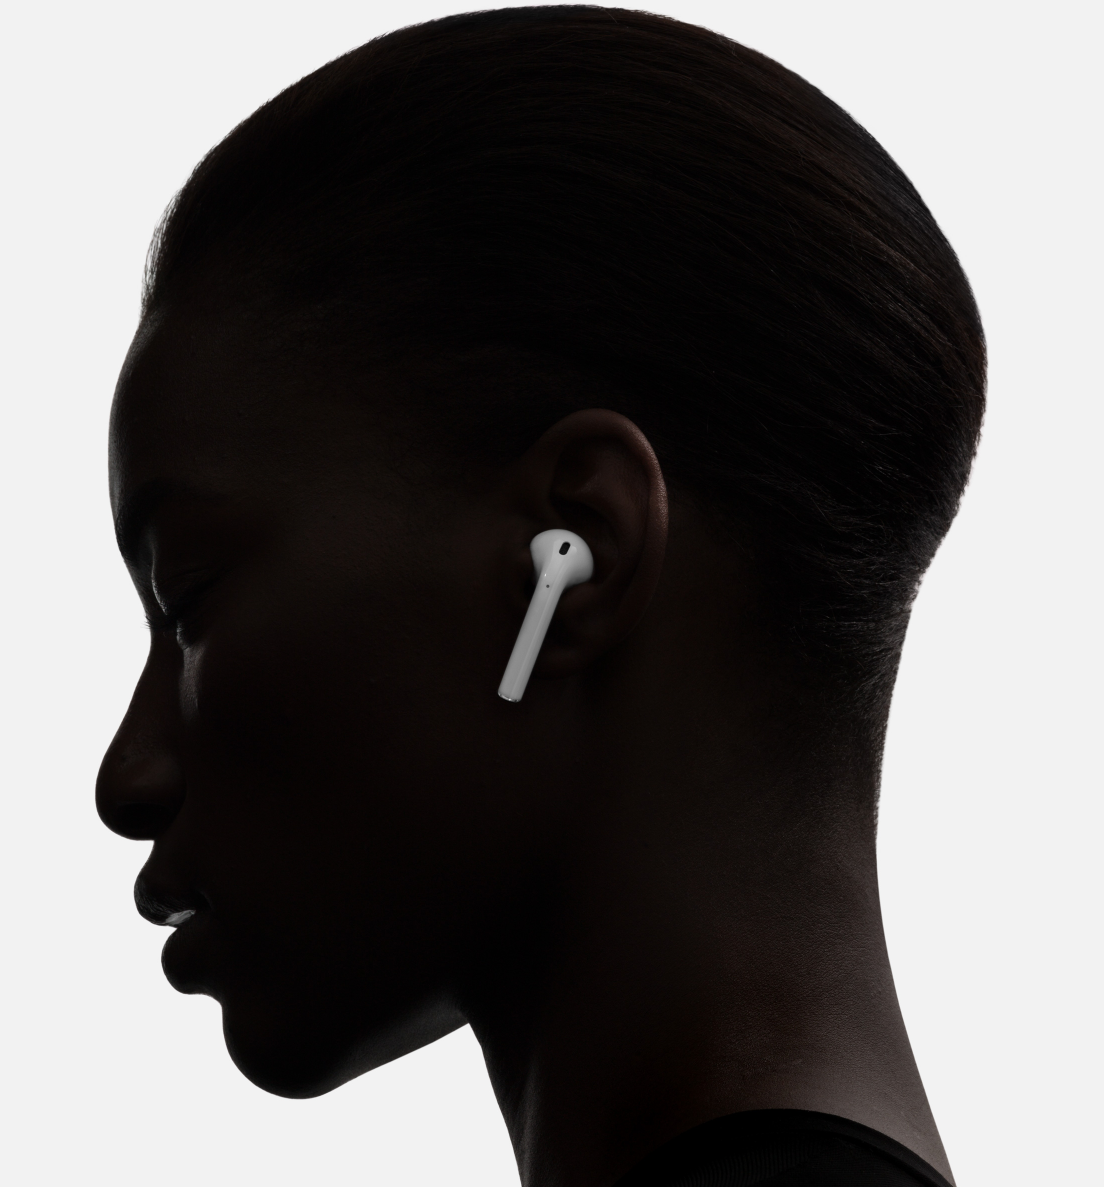 a profile of a woman with earphones